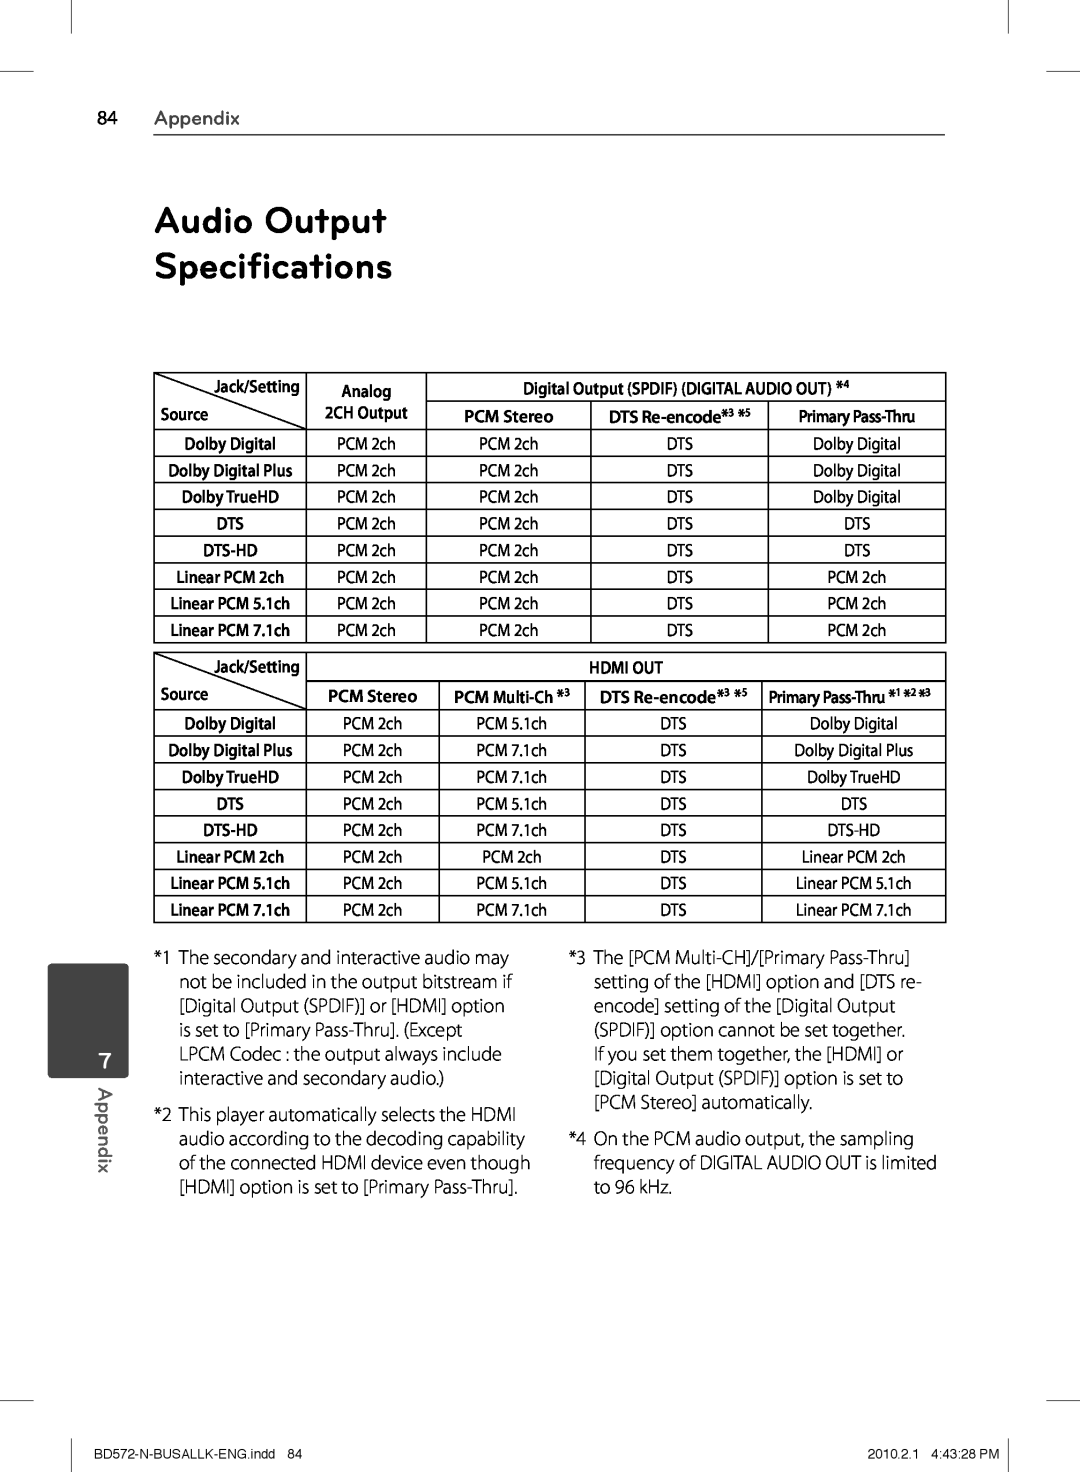 LG Electronics BD570 Audio Output Speciﬁcations, Appendix, Digital Output SPDIF DIGITAL AUDIO OUT, Source, Hdmi Out 